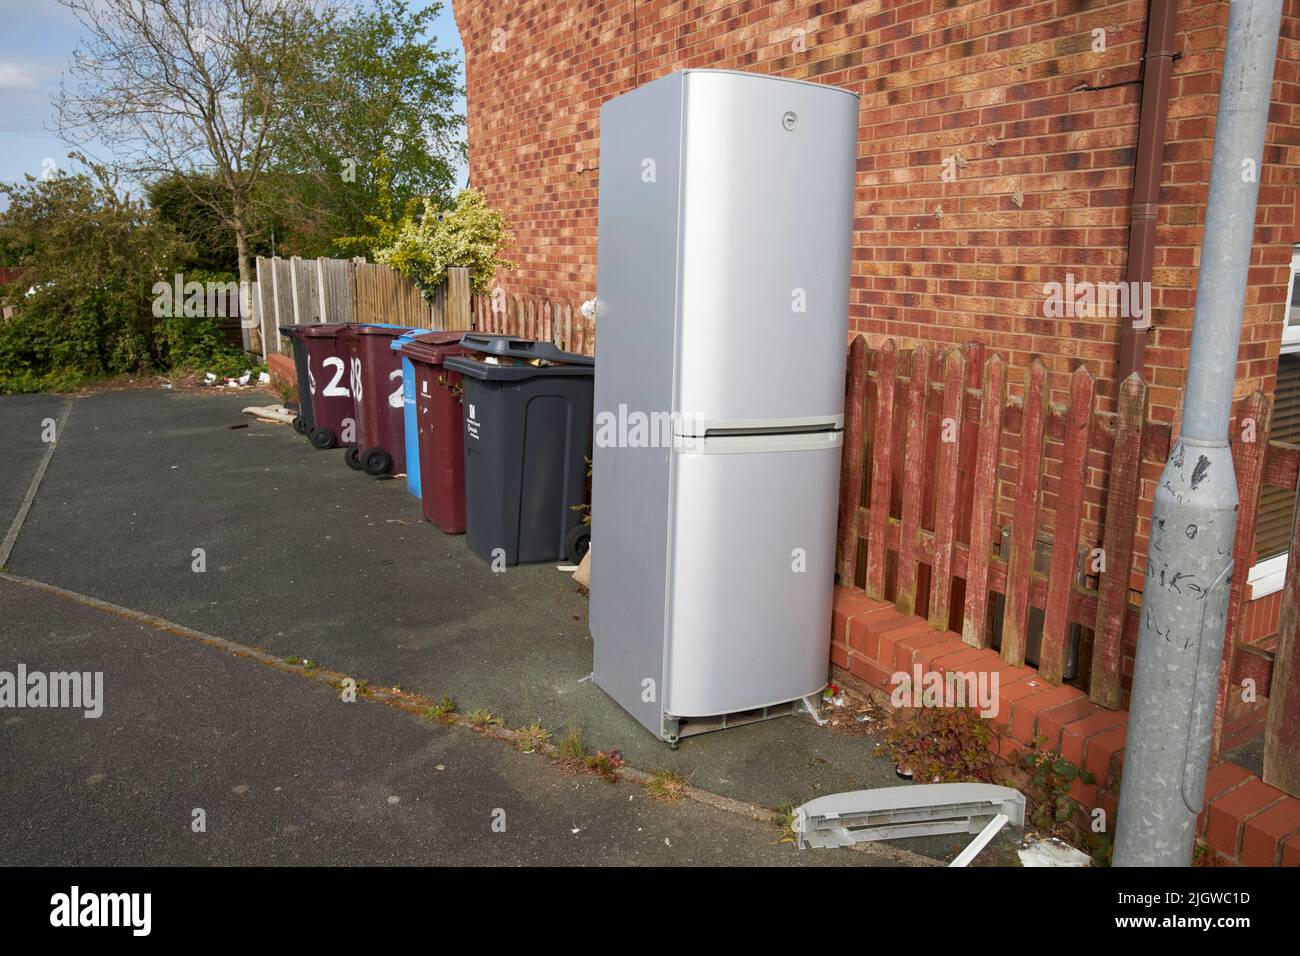 old broken fridge freezer left outside for council recycling pickup in the uk Stock Photo